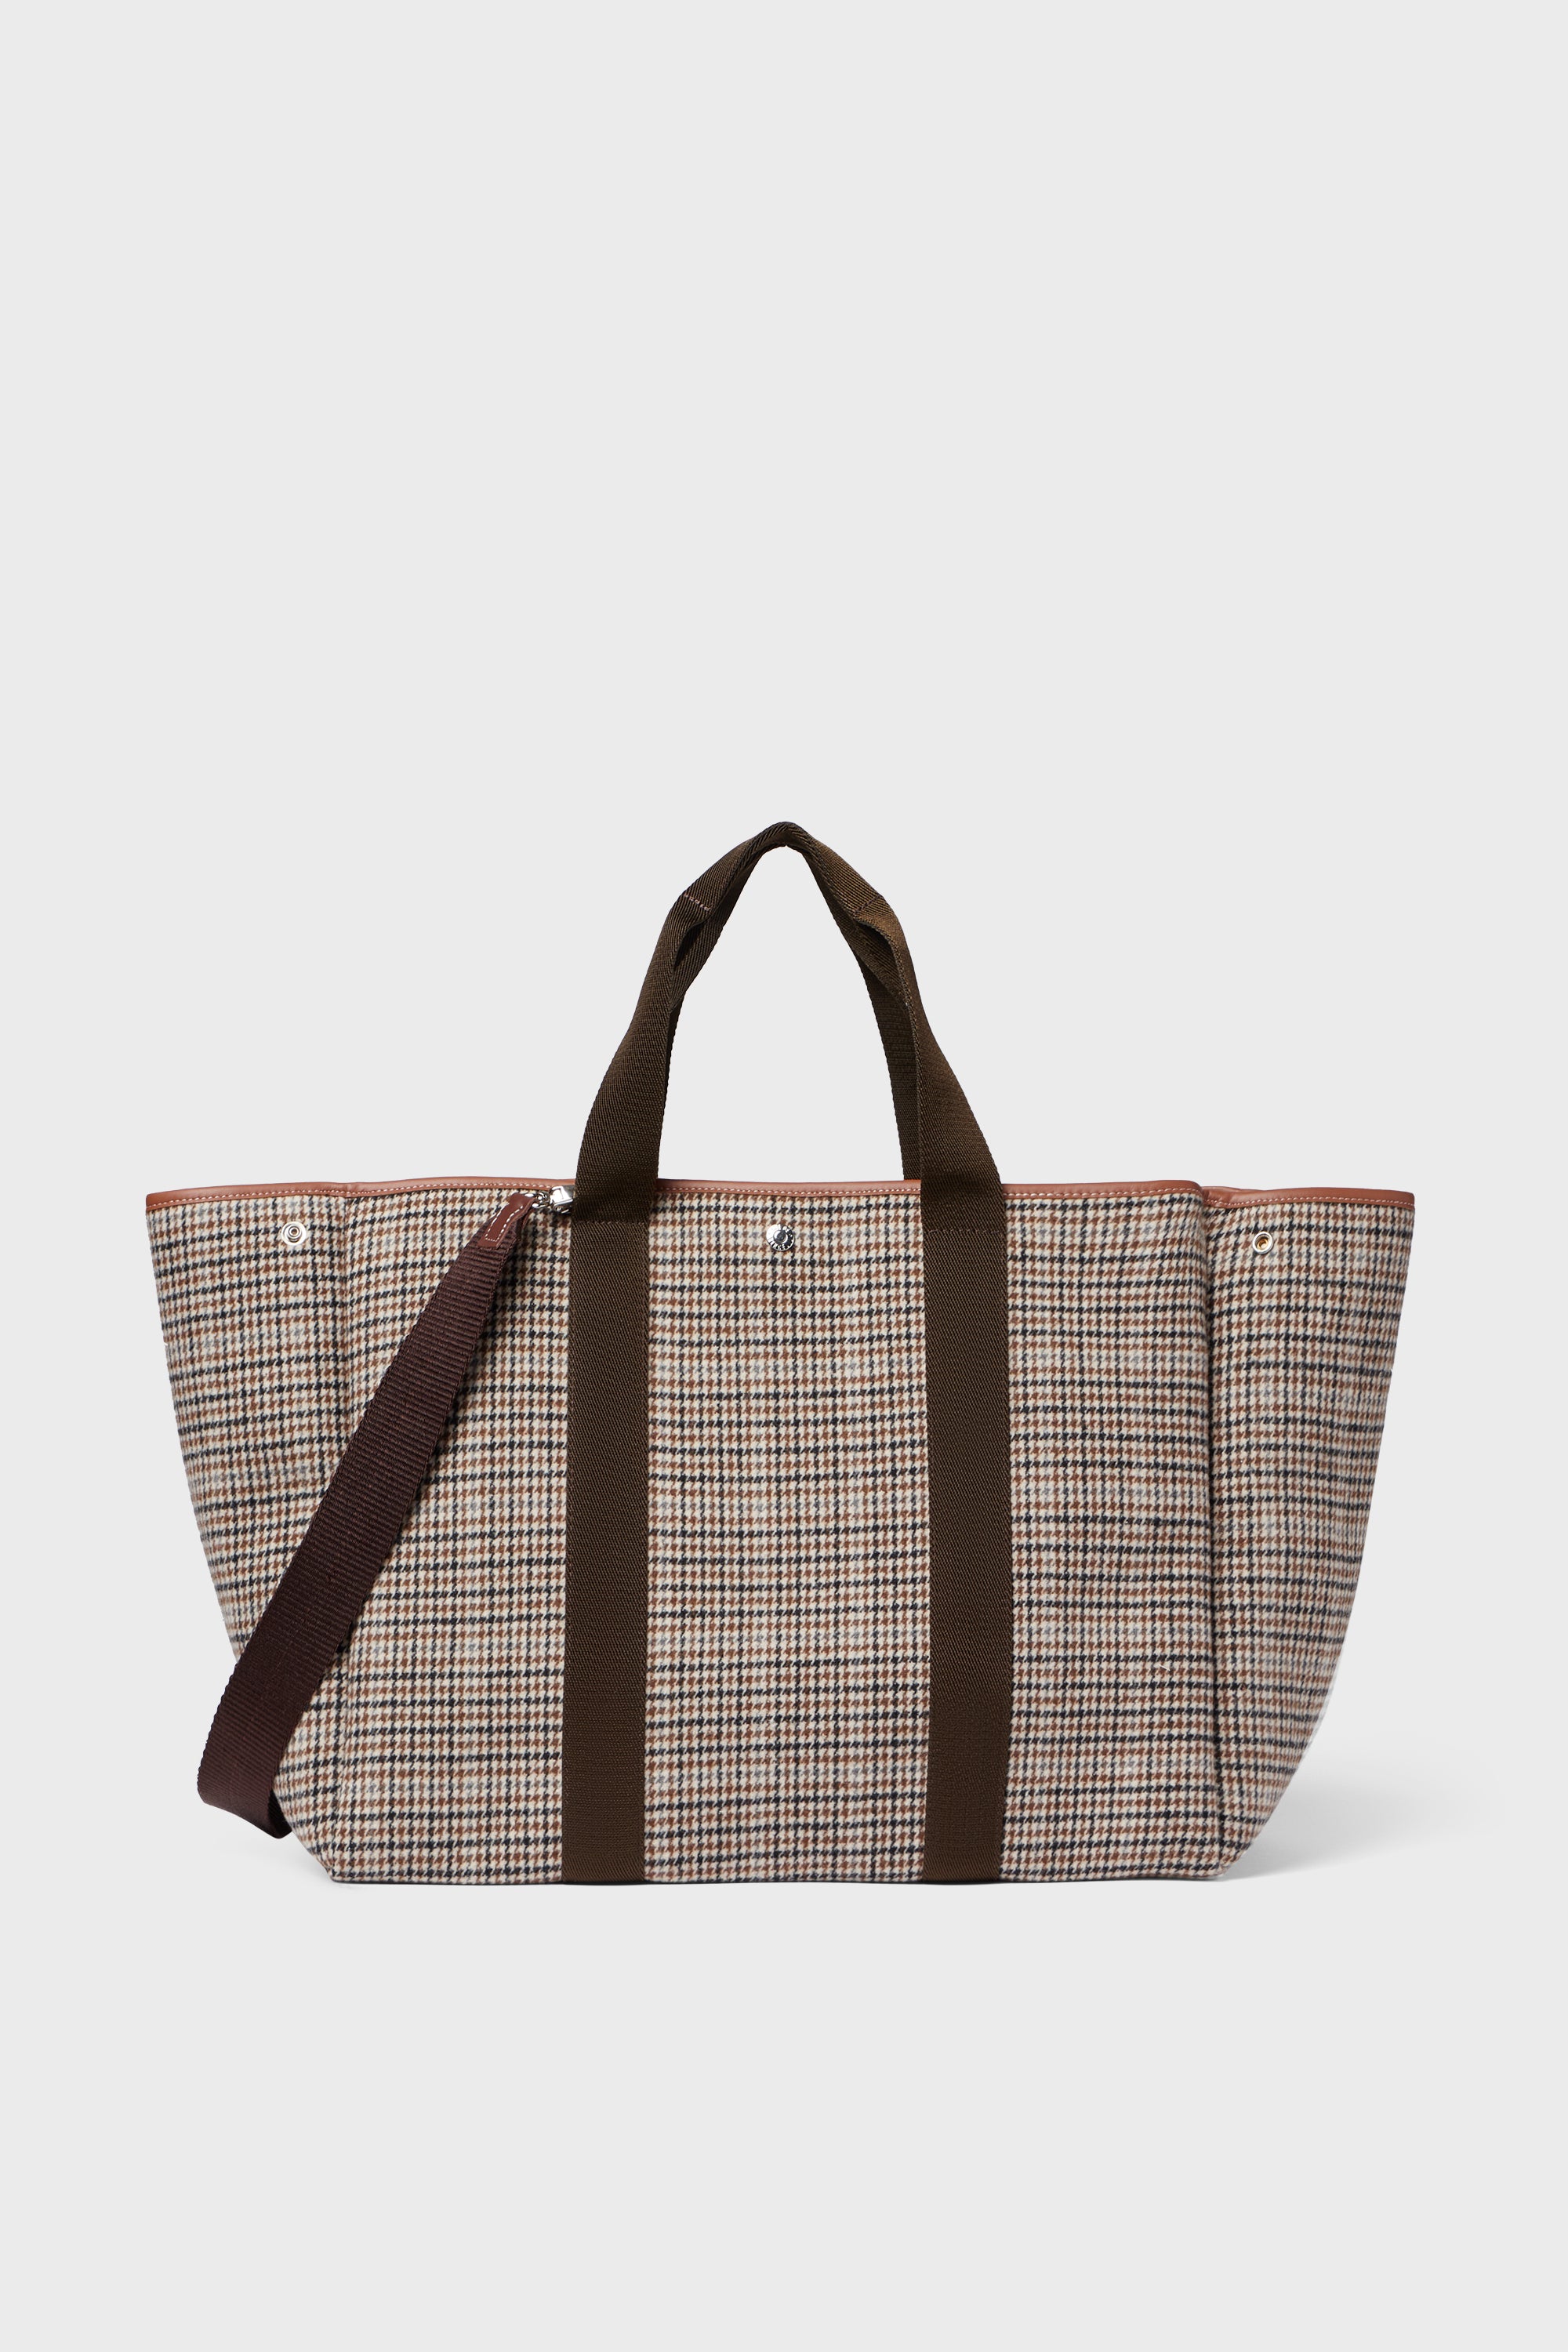 Beige Traversee M Quilted Tote Rue de Verneuil